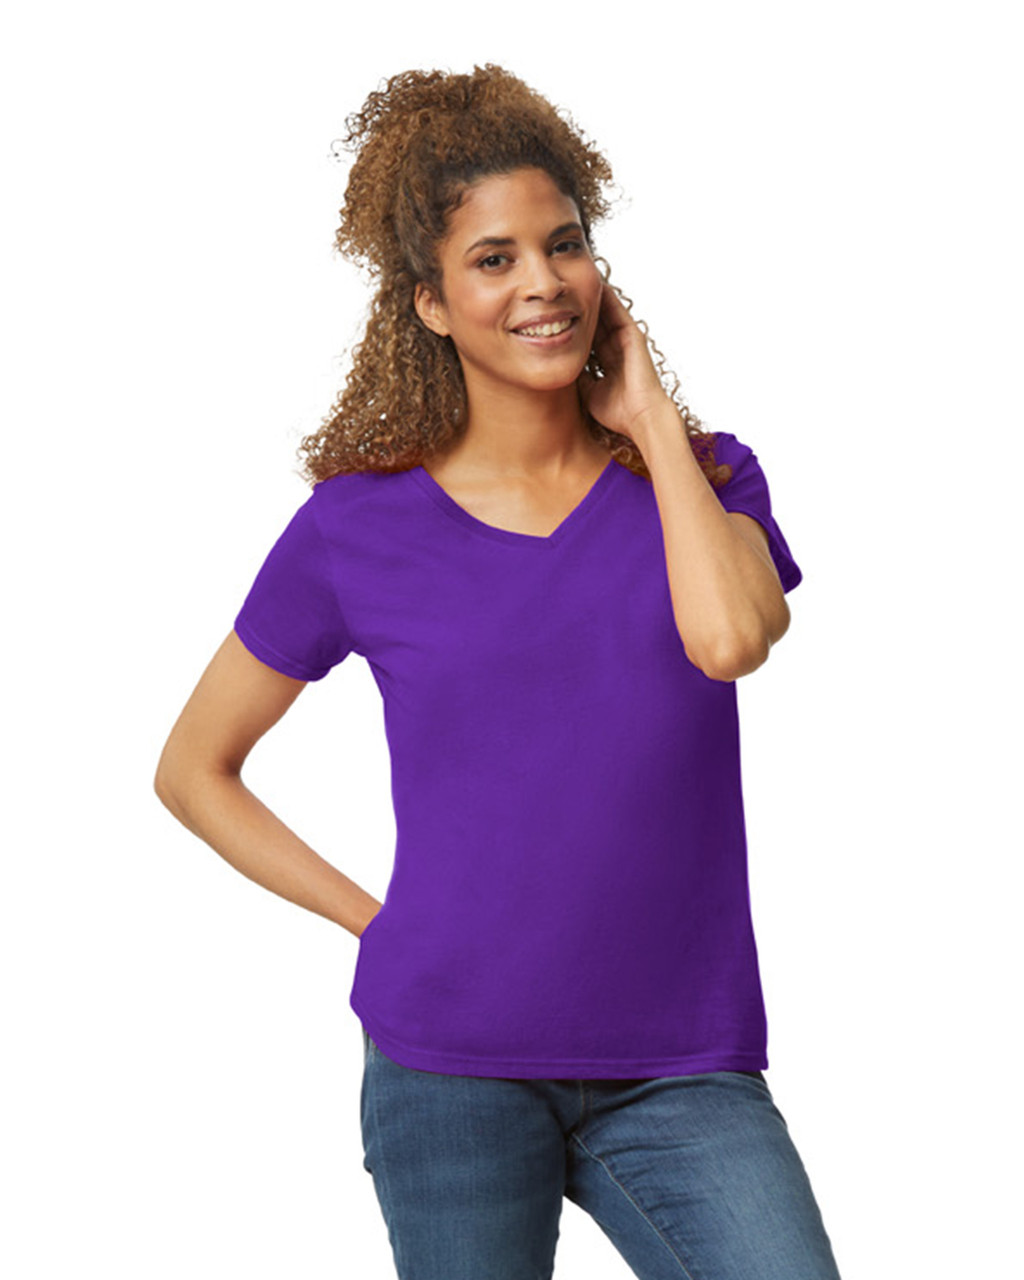 PLAIN PURPLE  USA T-SHIRT -MEMORABLE GIFT- AMERICAN V-NECK PURPLE T-SHIRT-TOP QUALITY-LOWEST PRICE GAURANTEED-DO NOT MISS THIS CHANCE-FREE HOME(POST OFFICE) DELIVERY-ART NO. GL41V00VL-REA 27%